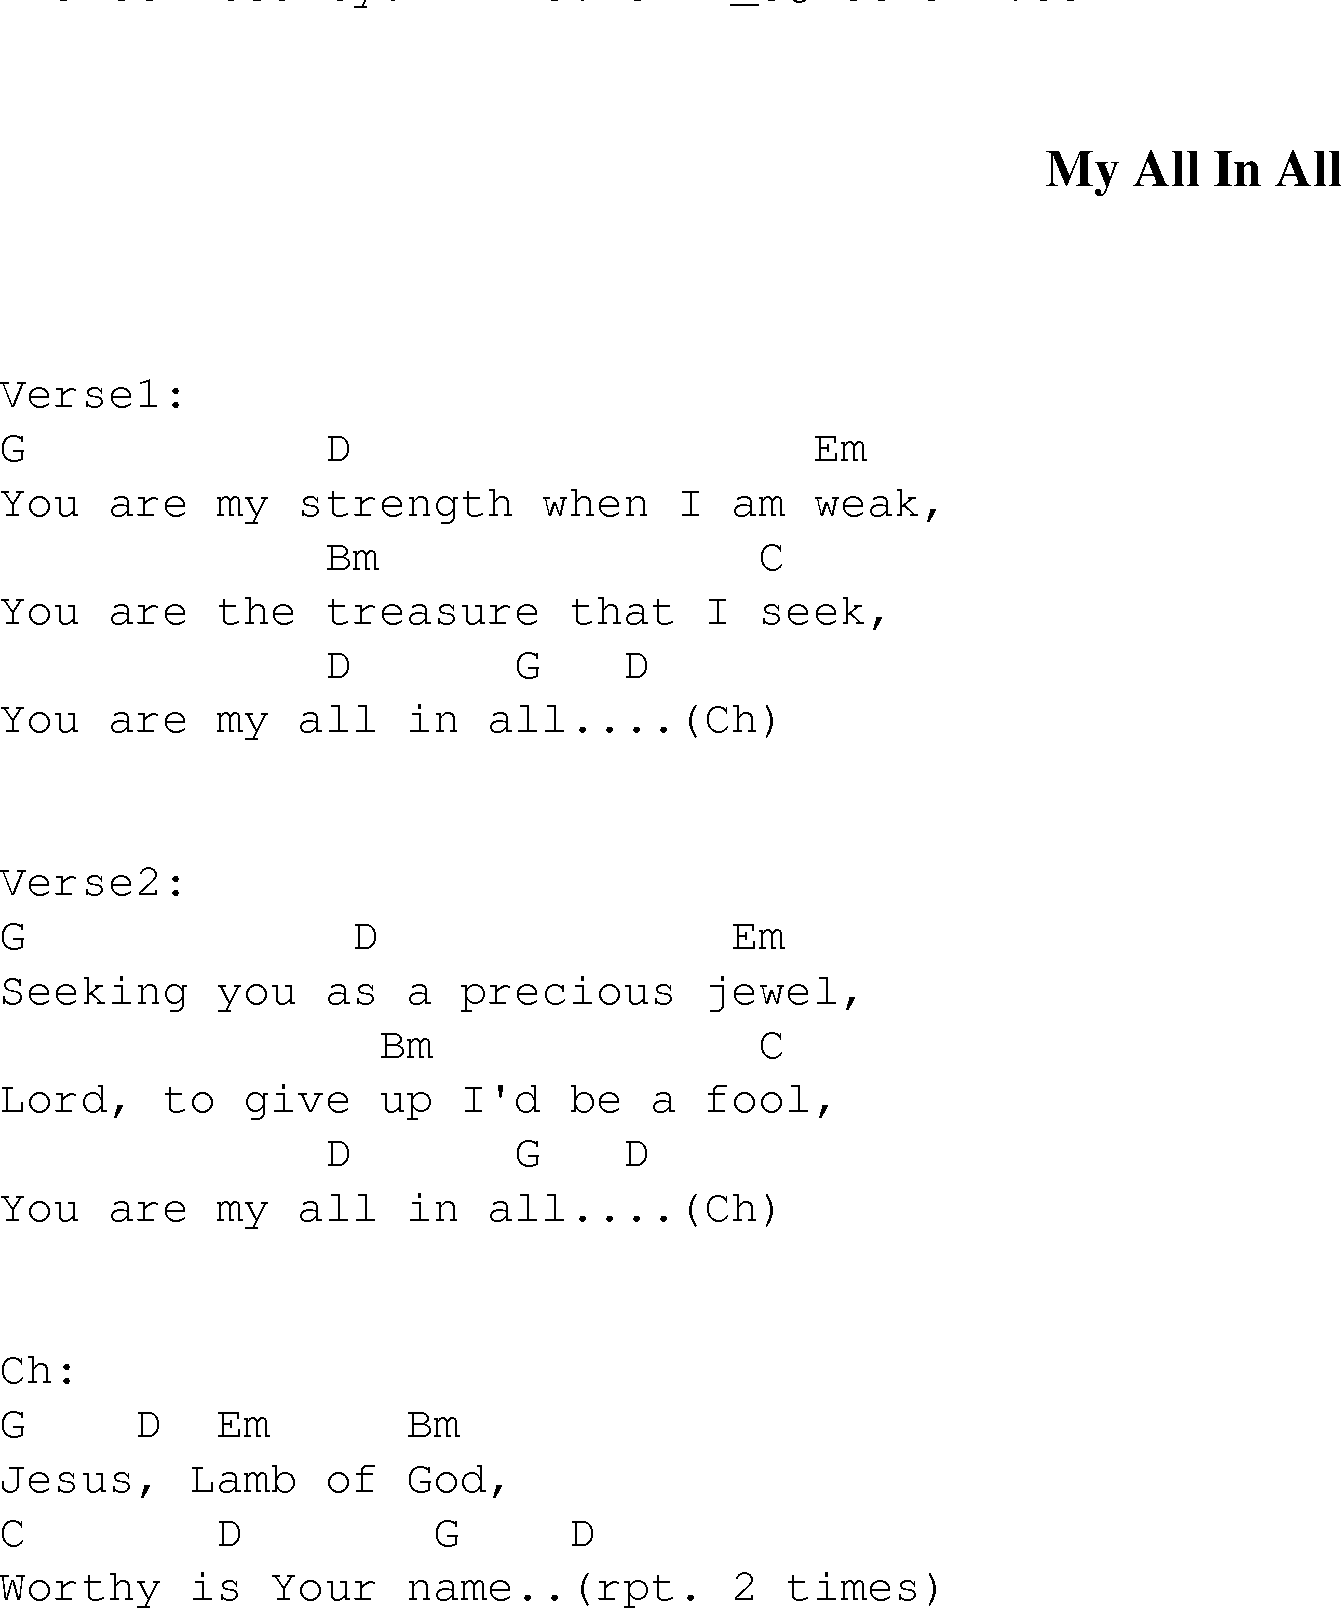 Gospel Song: my_all_in_all, lyrics and chords.